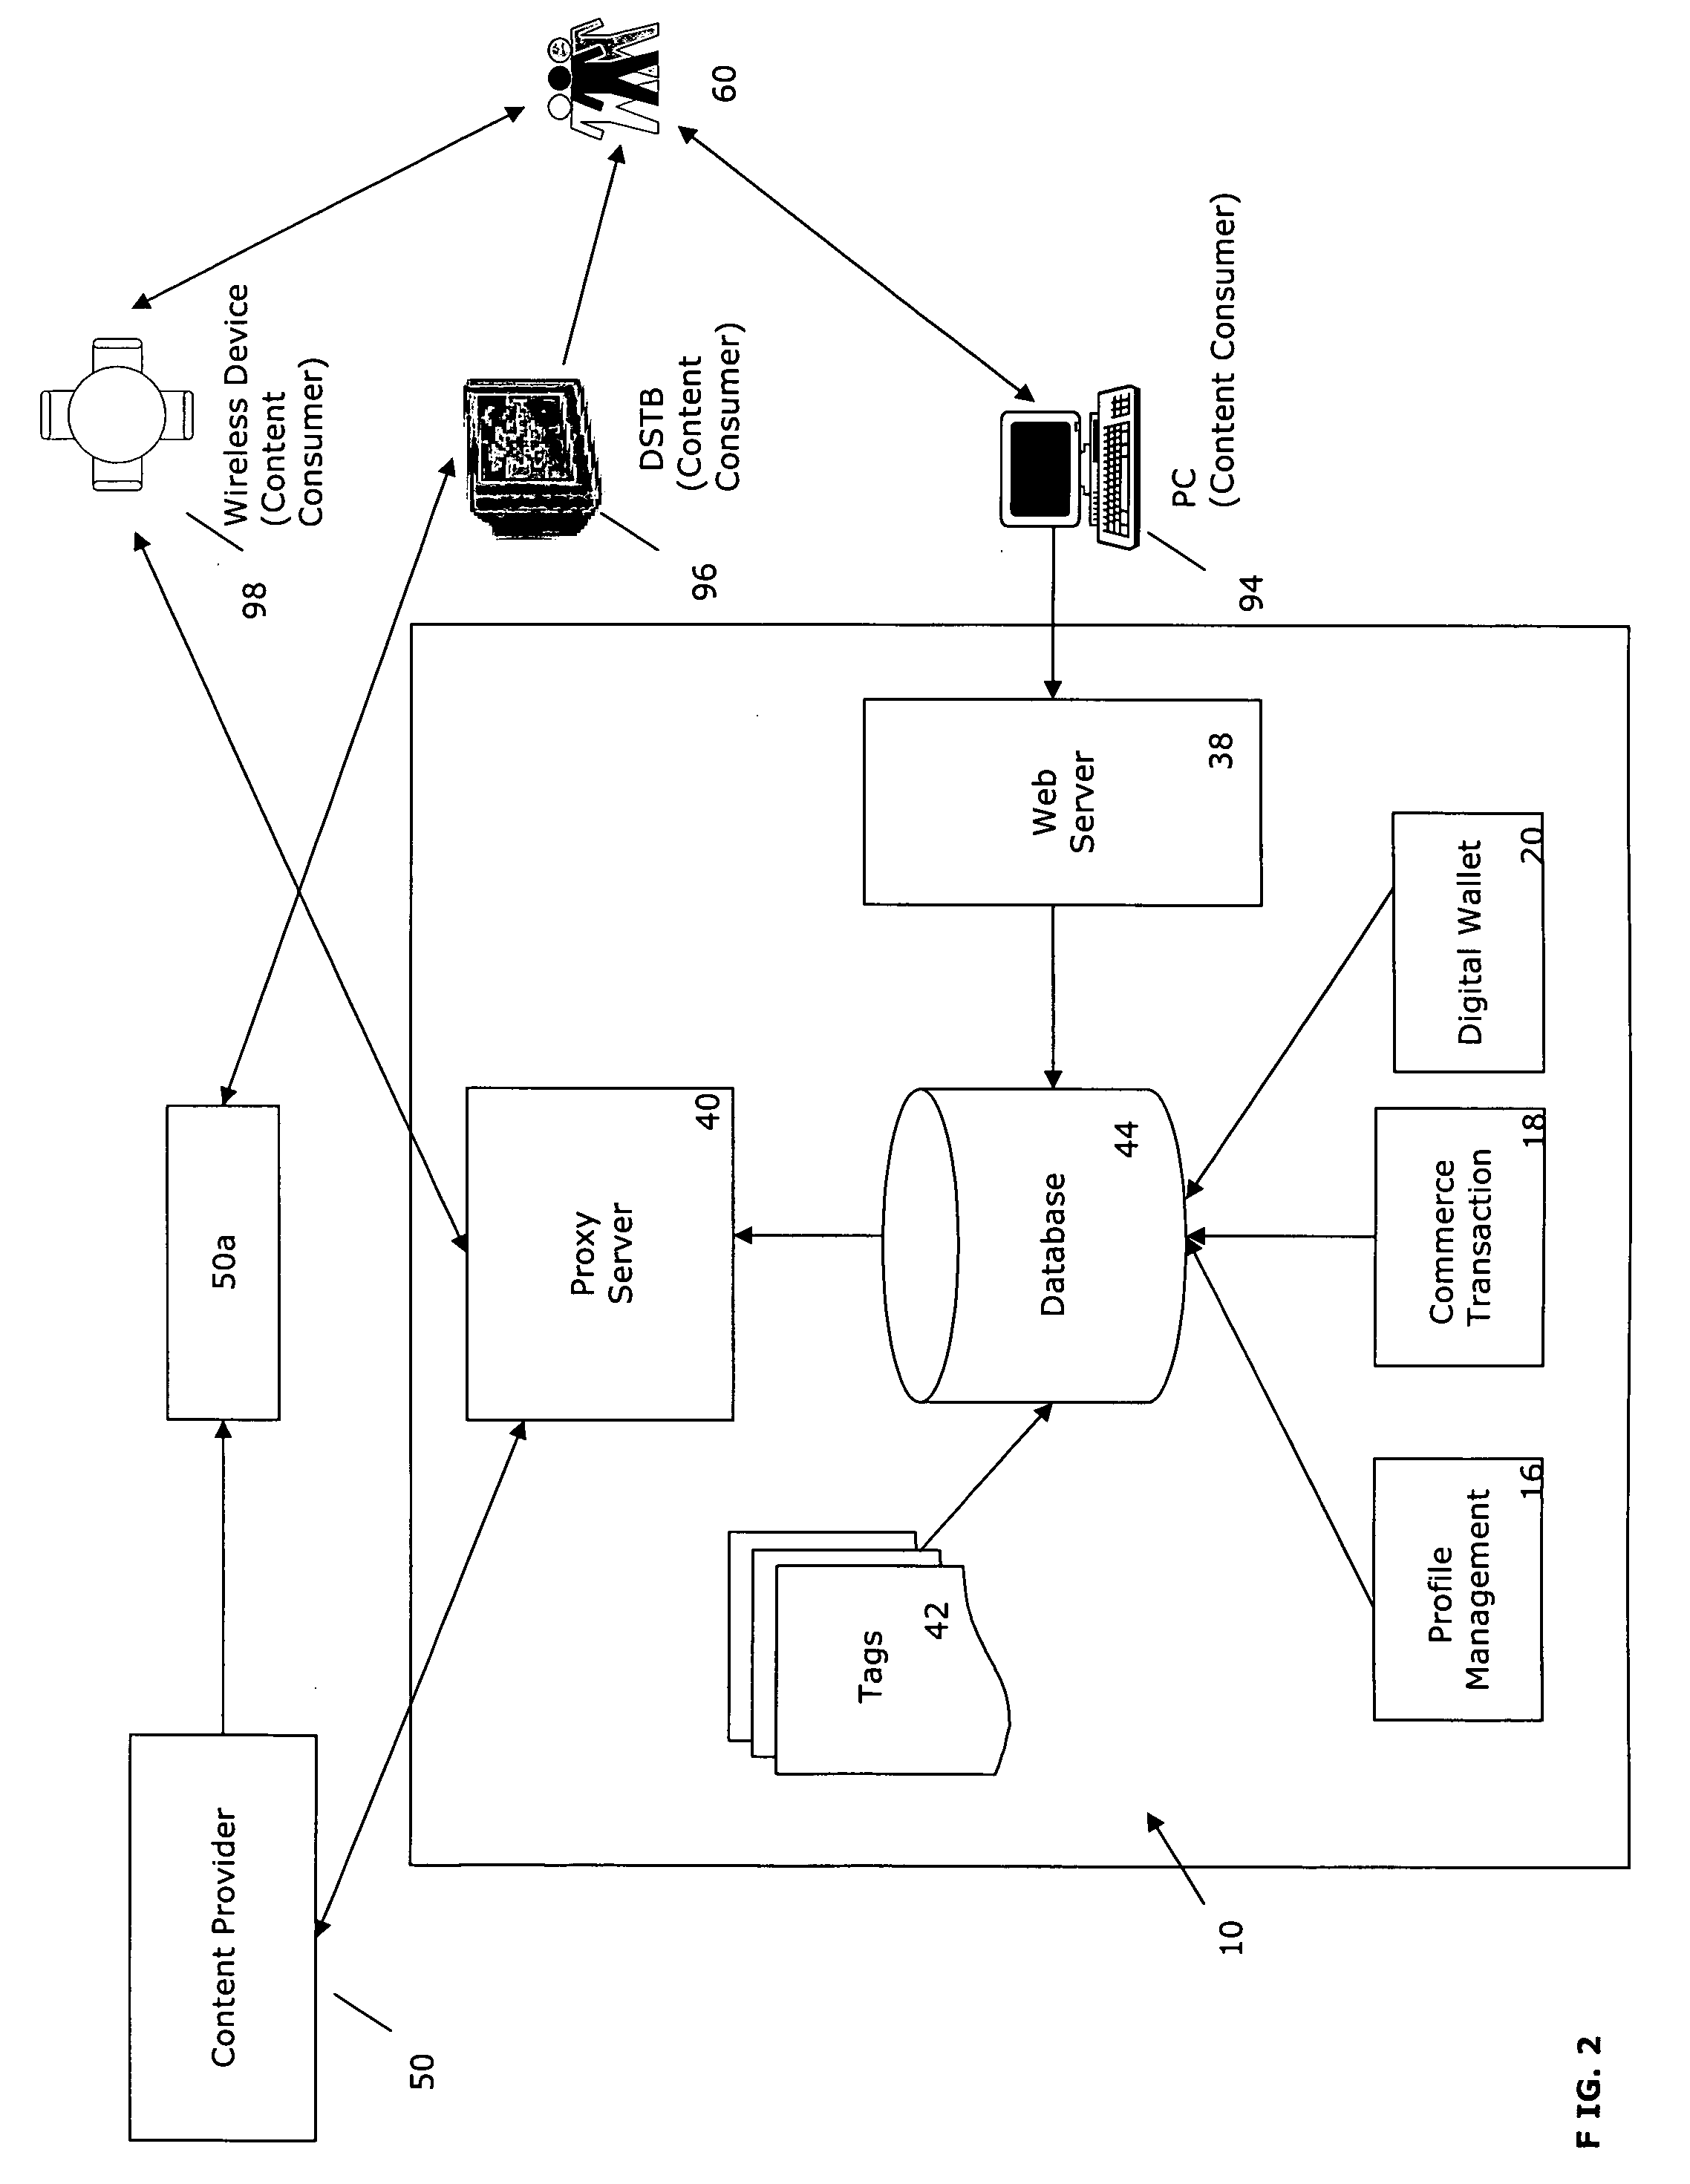 System and method for two-way communication between media consumers and media providers